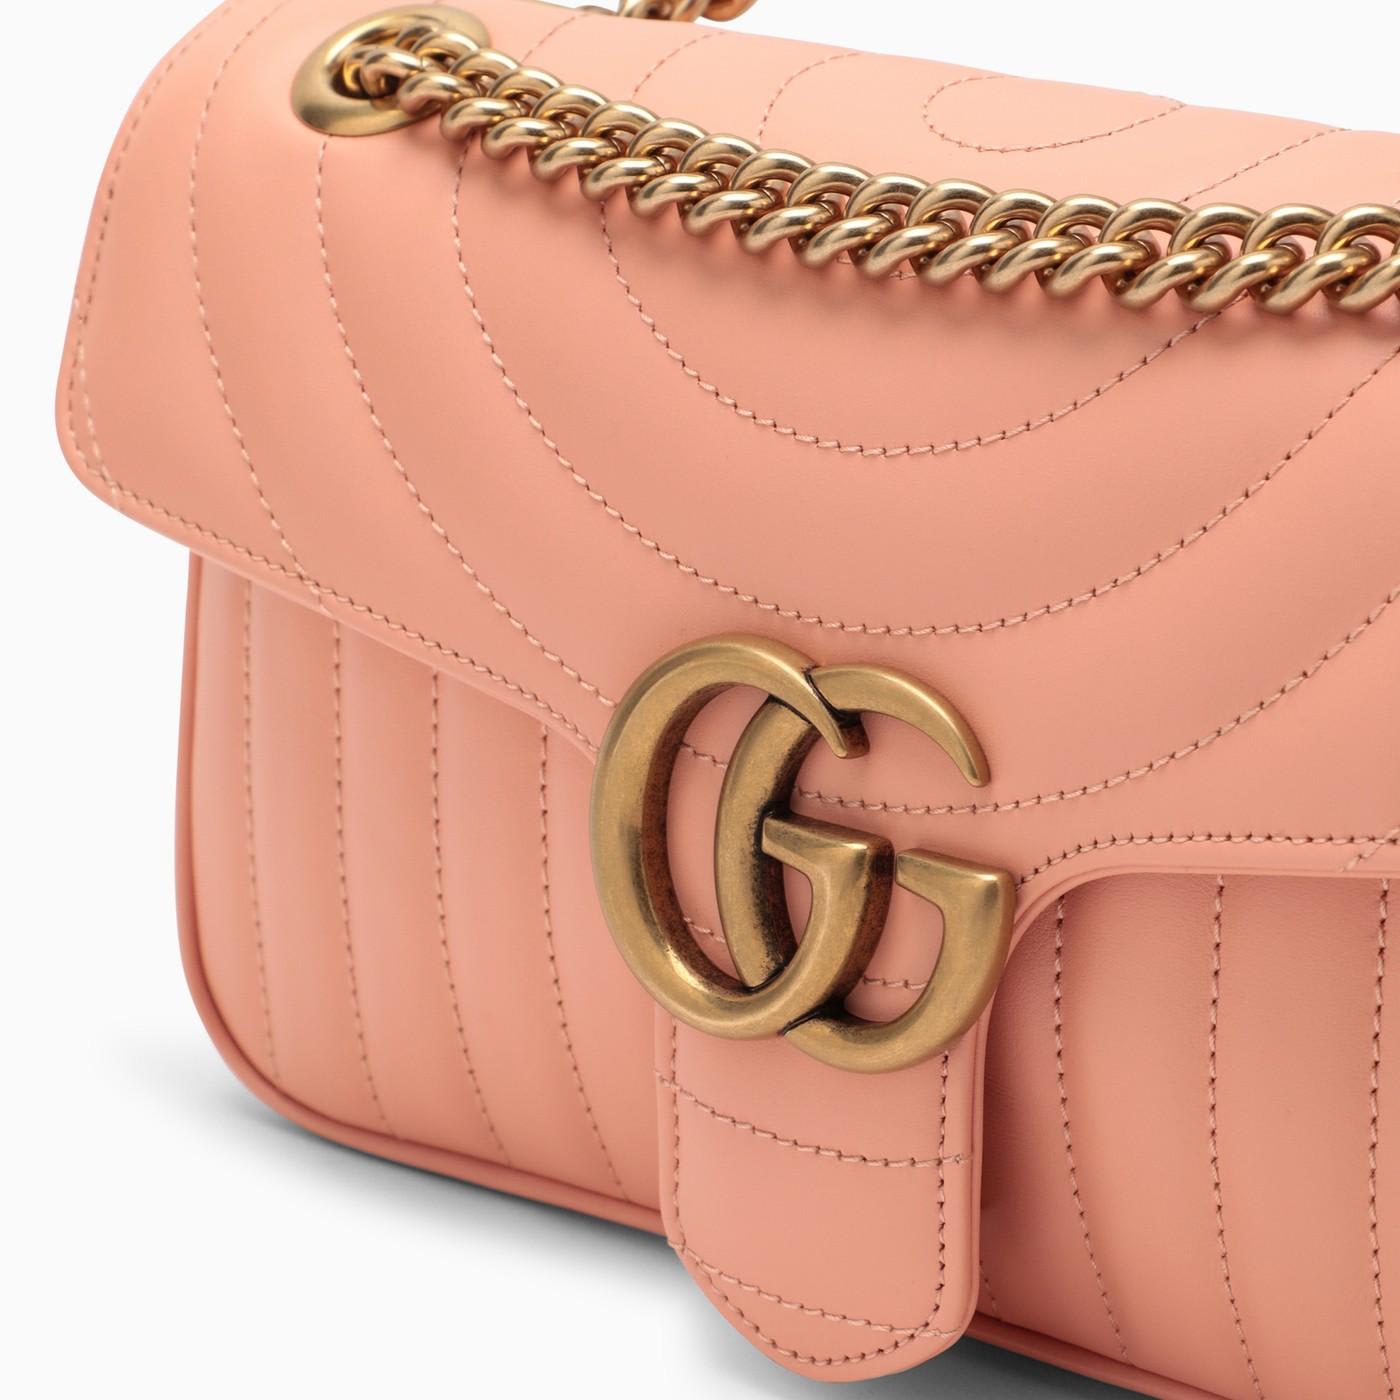 Gucci Peachy Gg Marmont Small Shoulder Bag